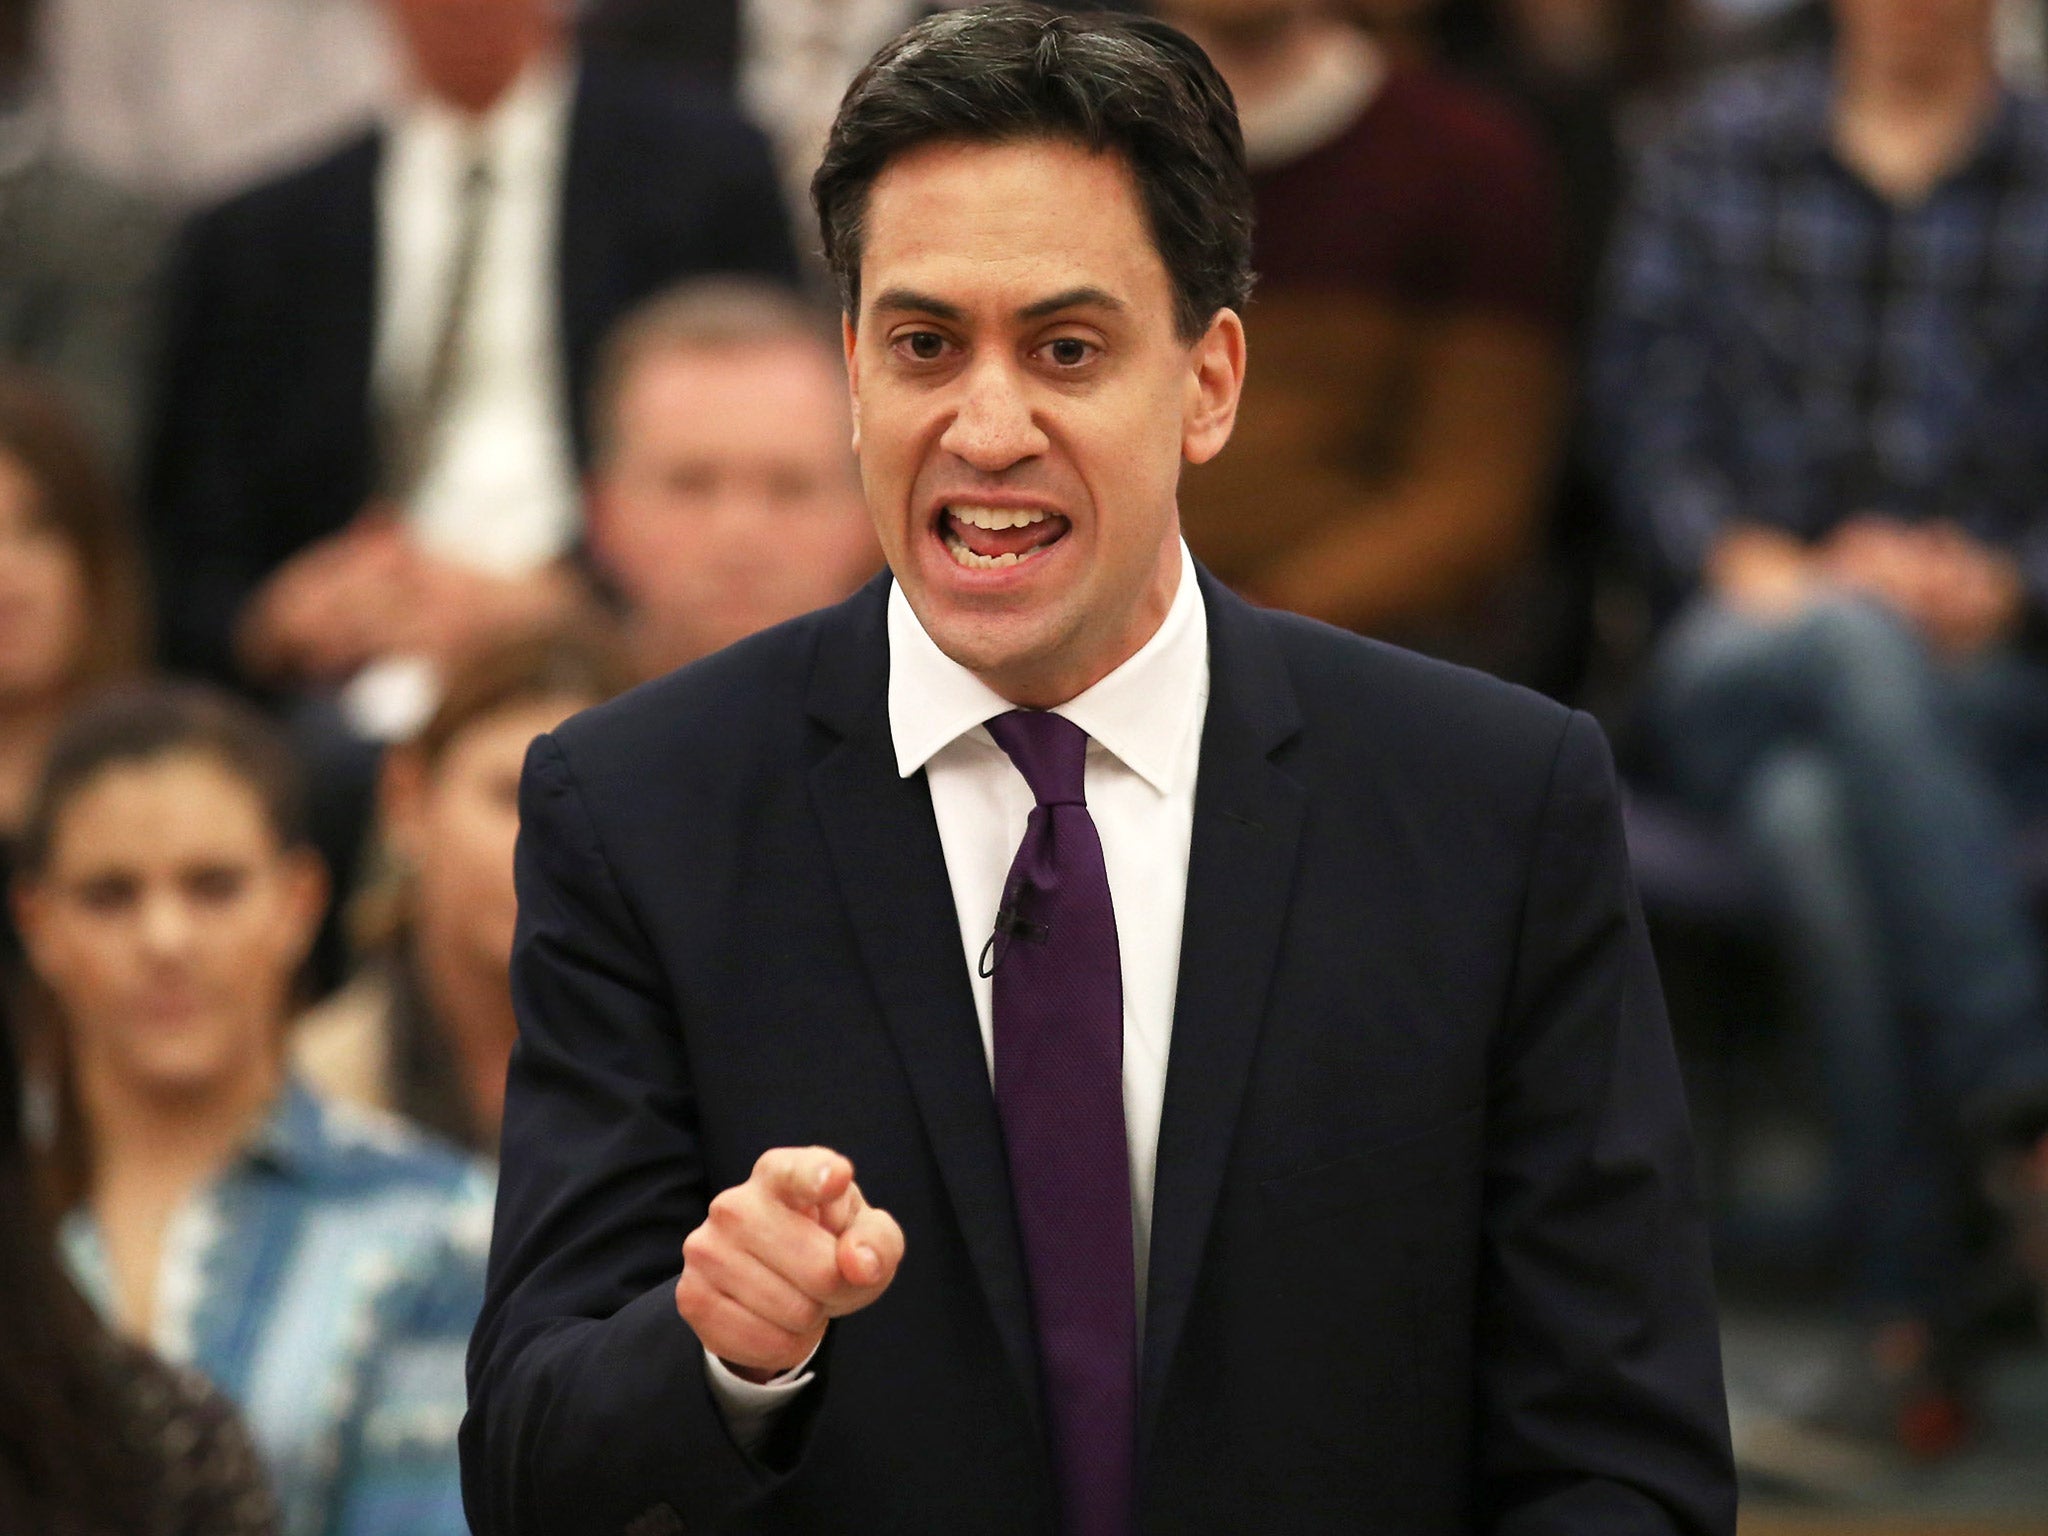 Ed Miliband will claim the Tories' plan for income tax cuts would put public services at risk